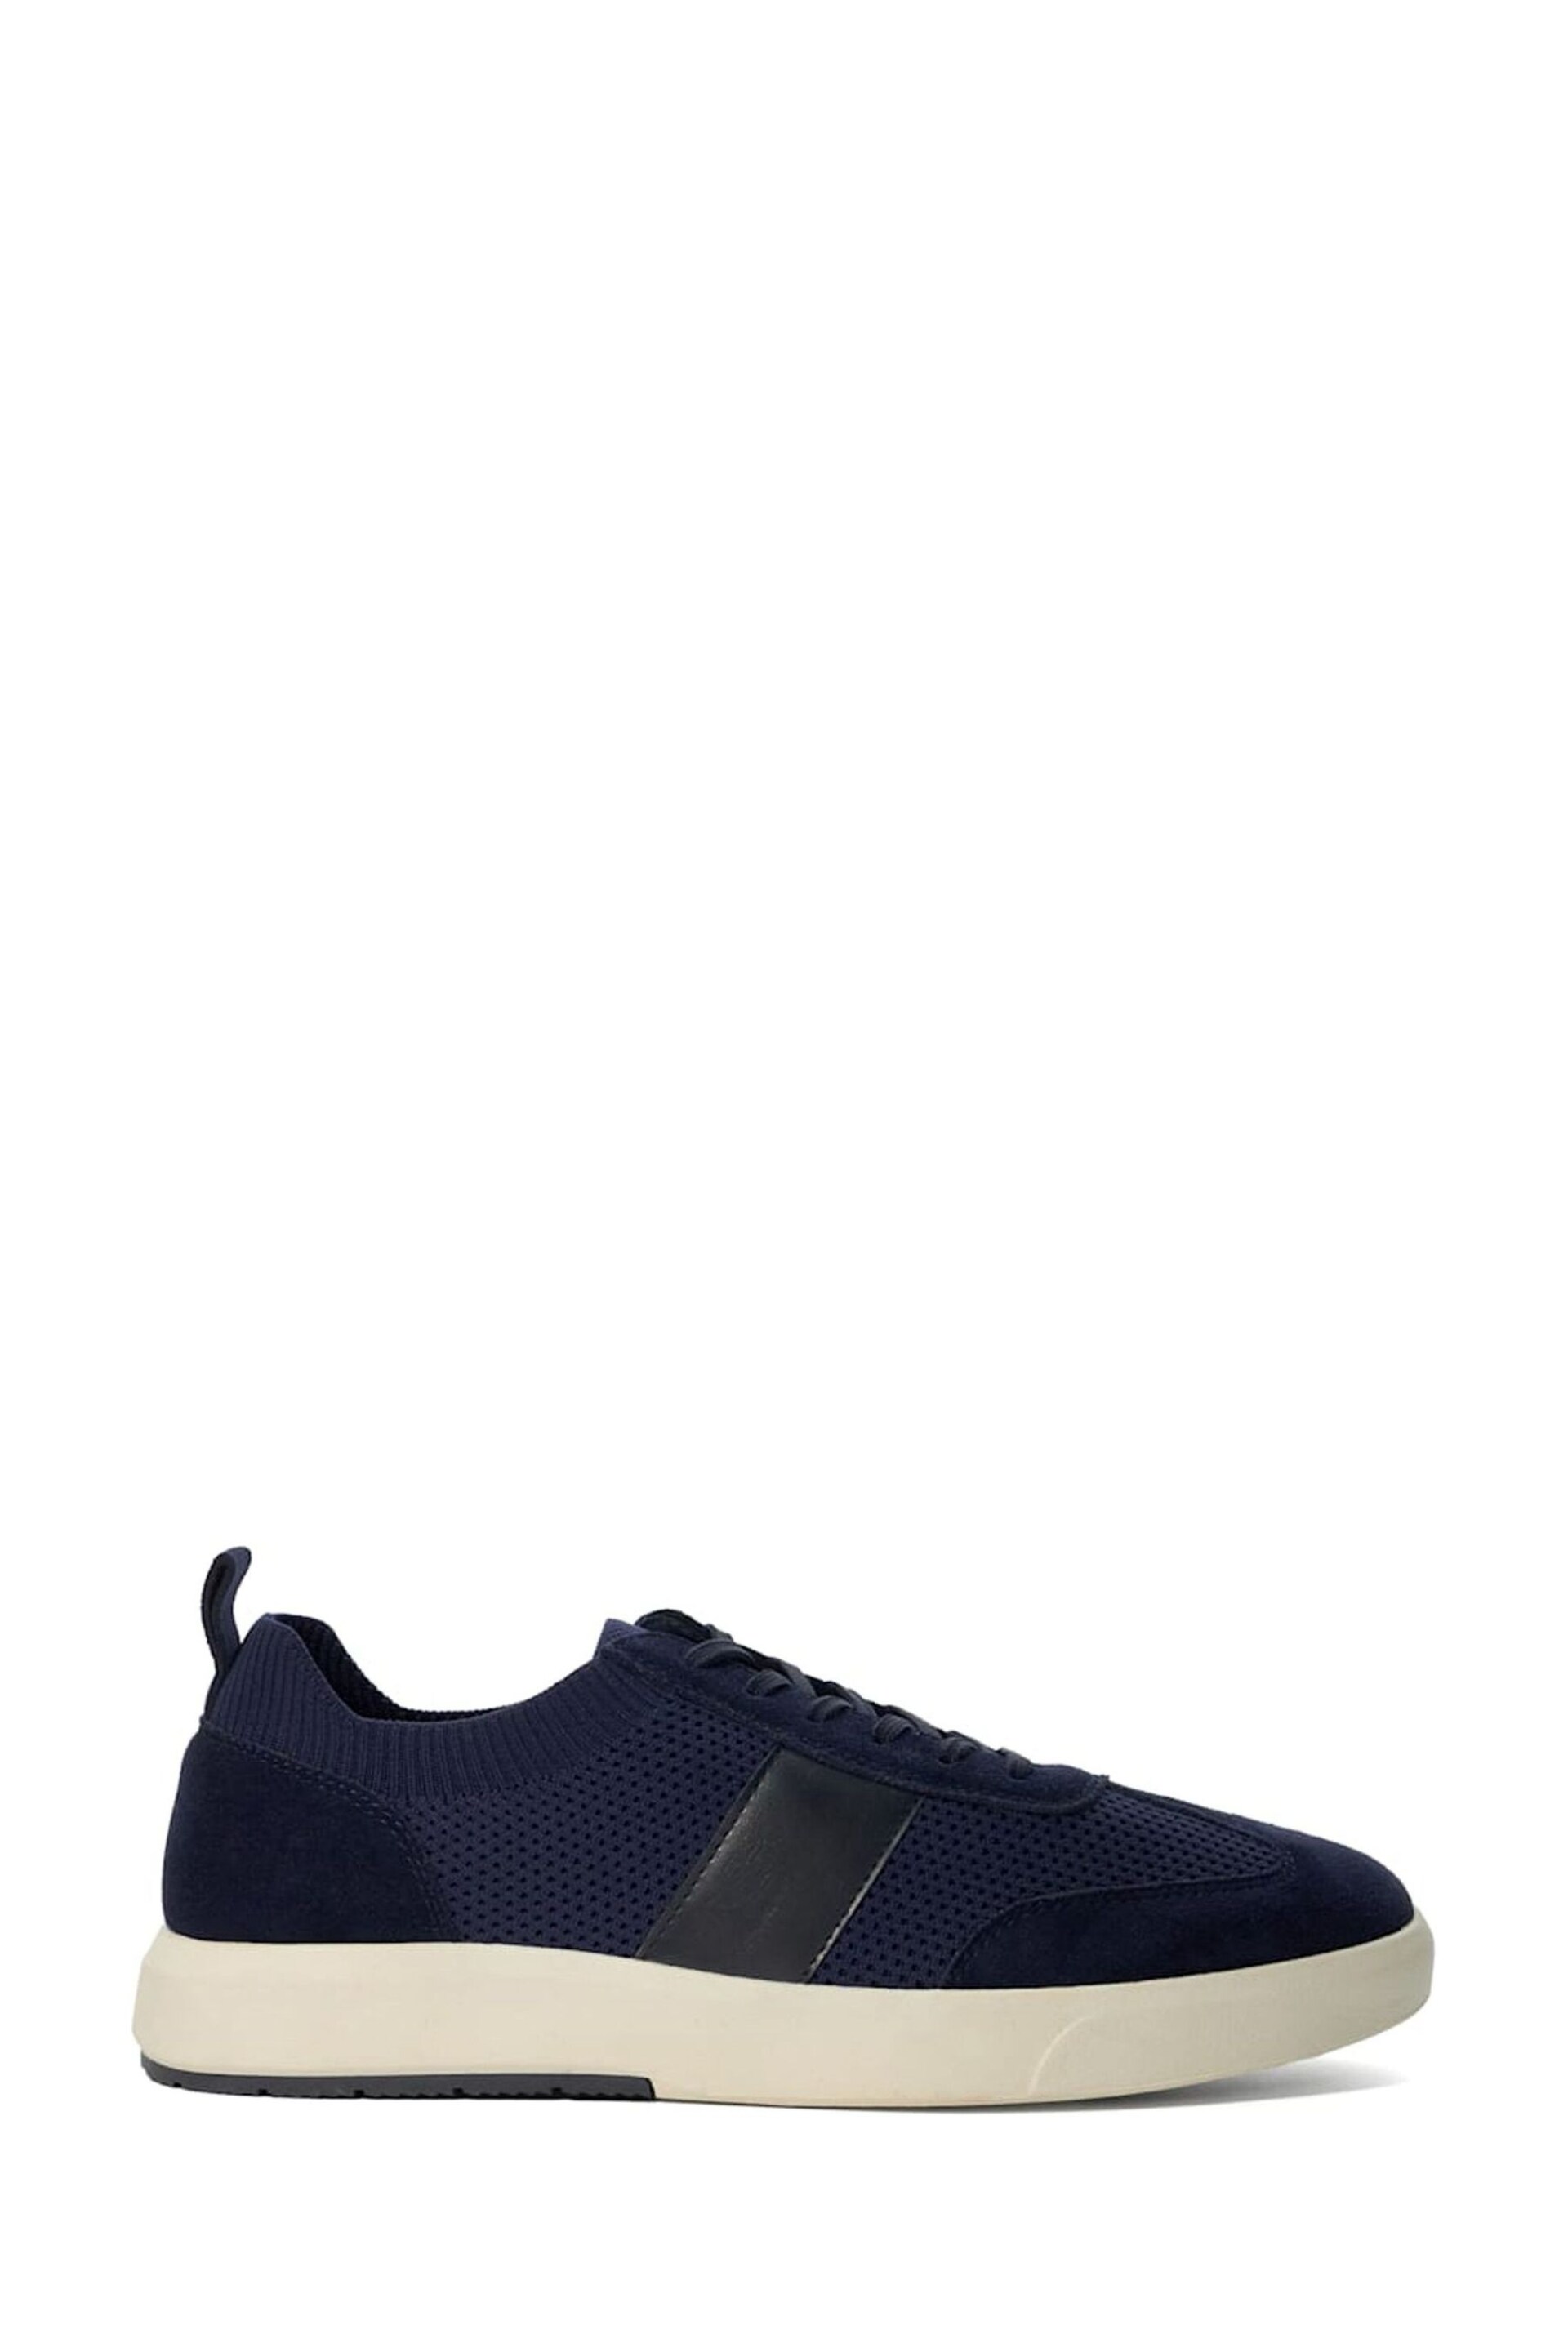 Dune London Blue Trailing Knitted Runner Trainers - Image 1 of 5